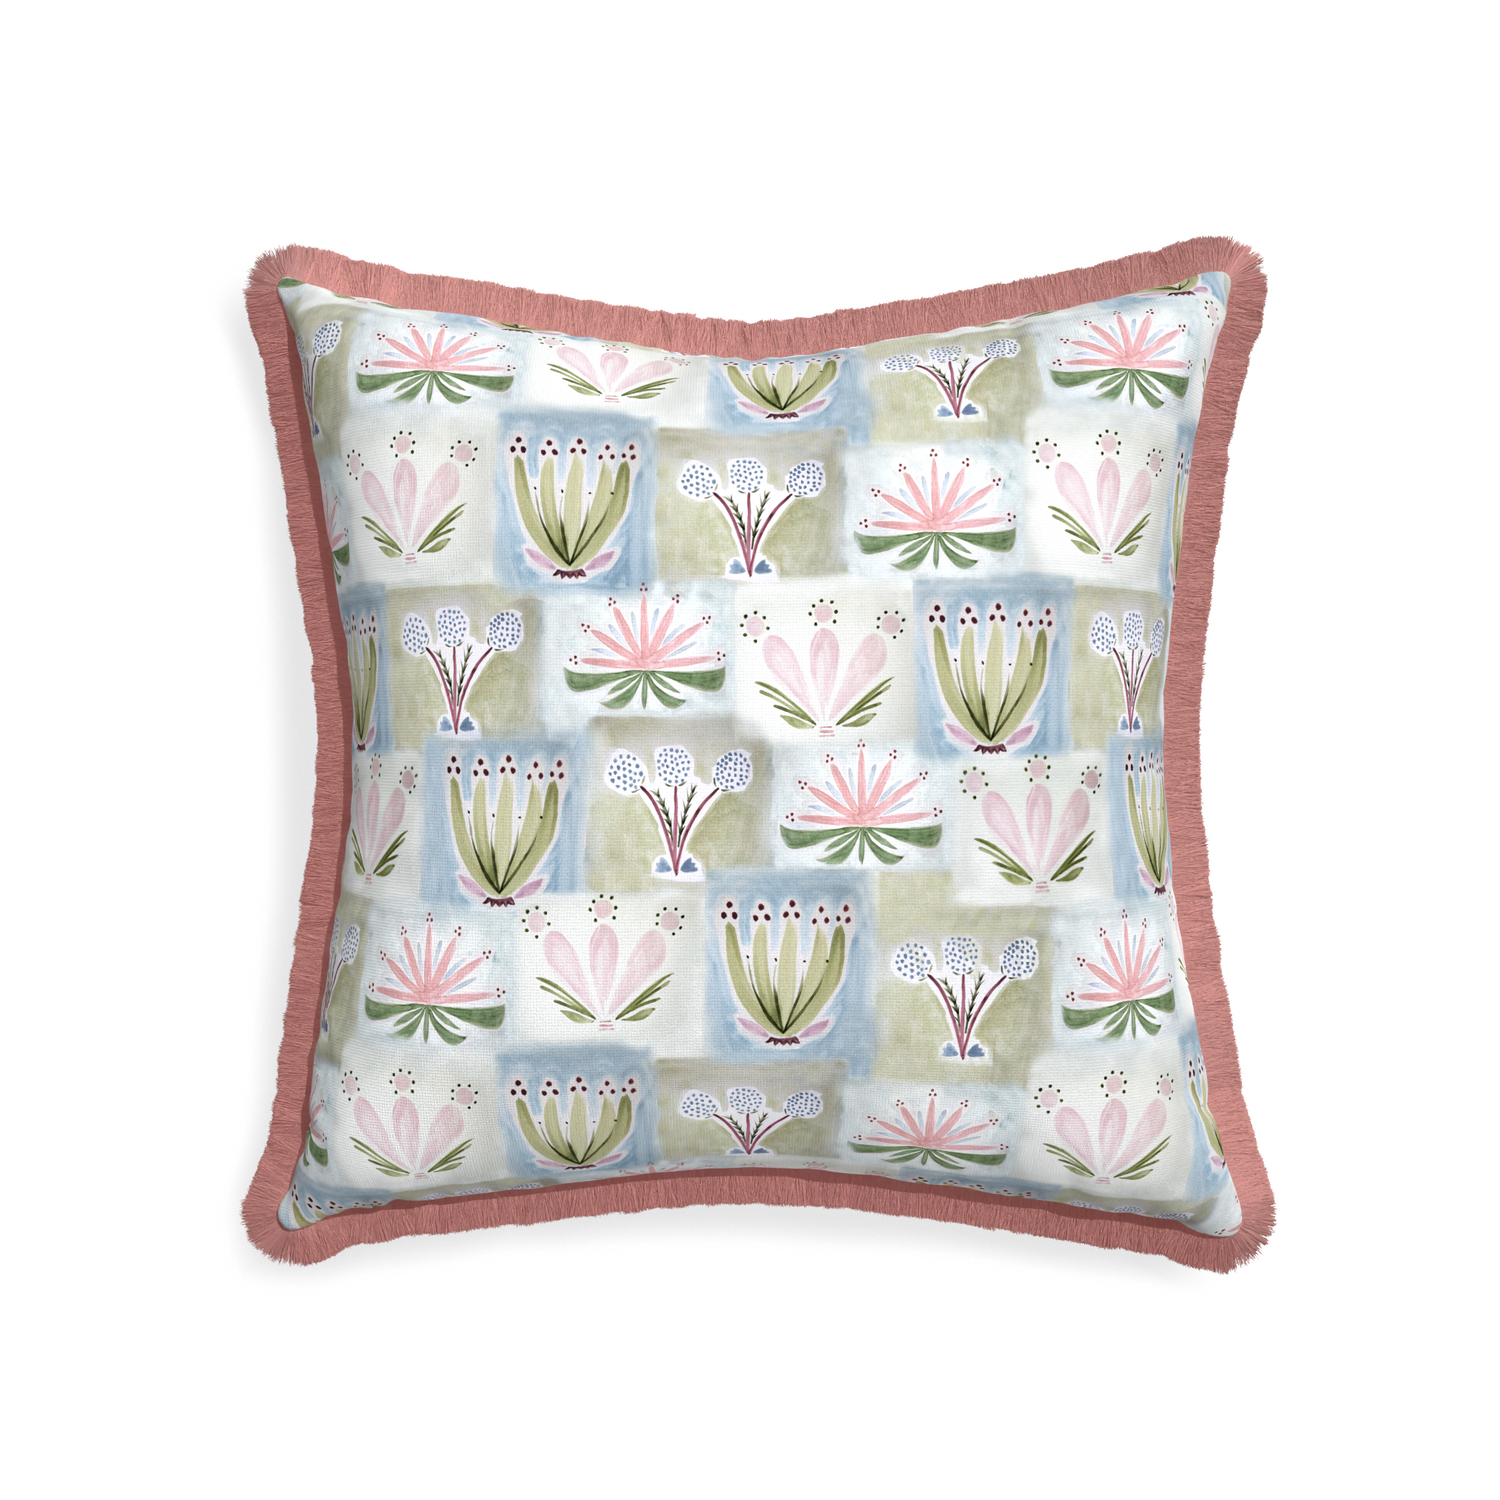 22-square harper custom hand-painted floralpillow with d fringe on white background